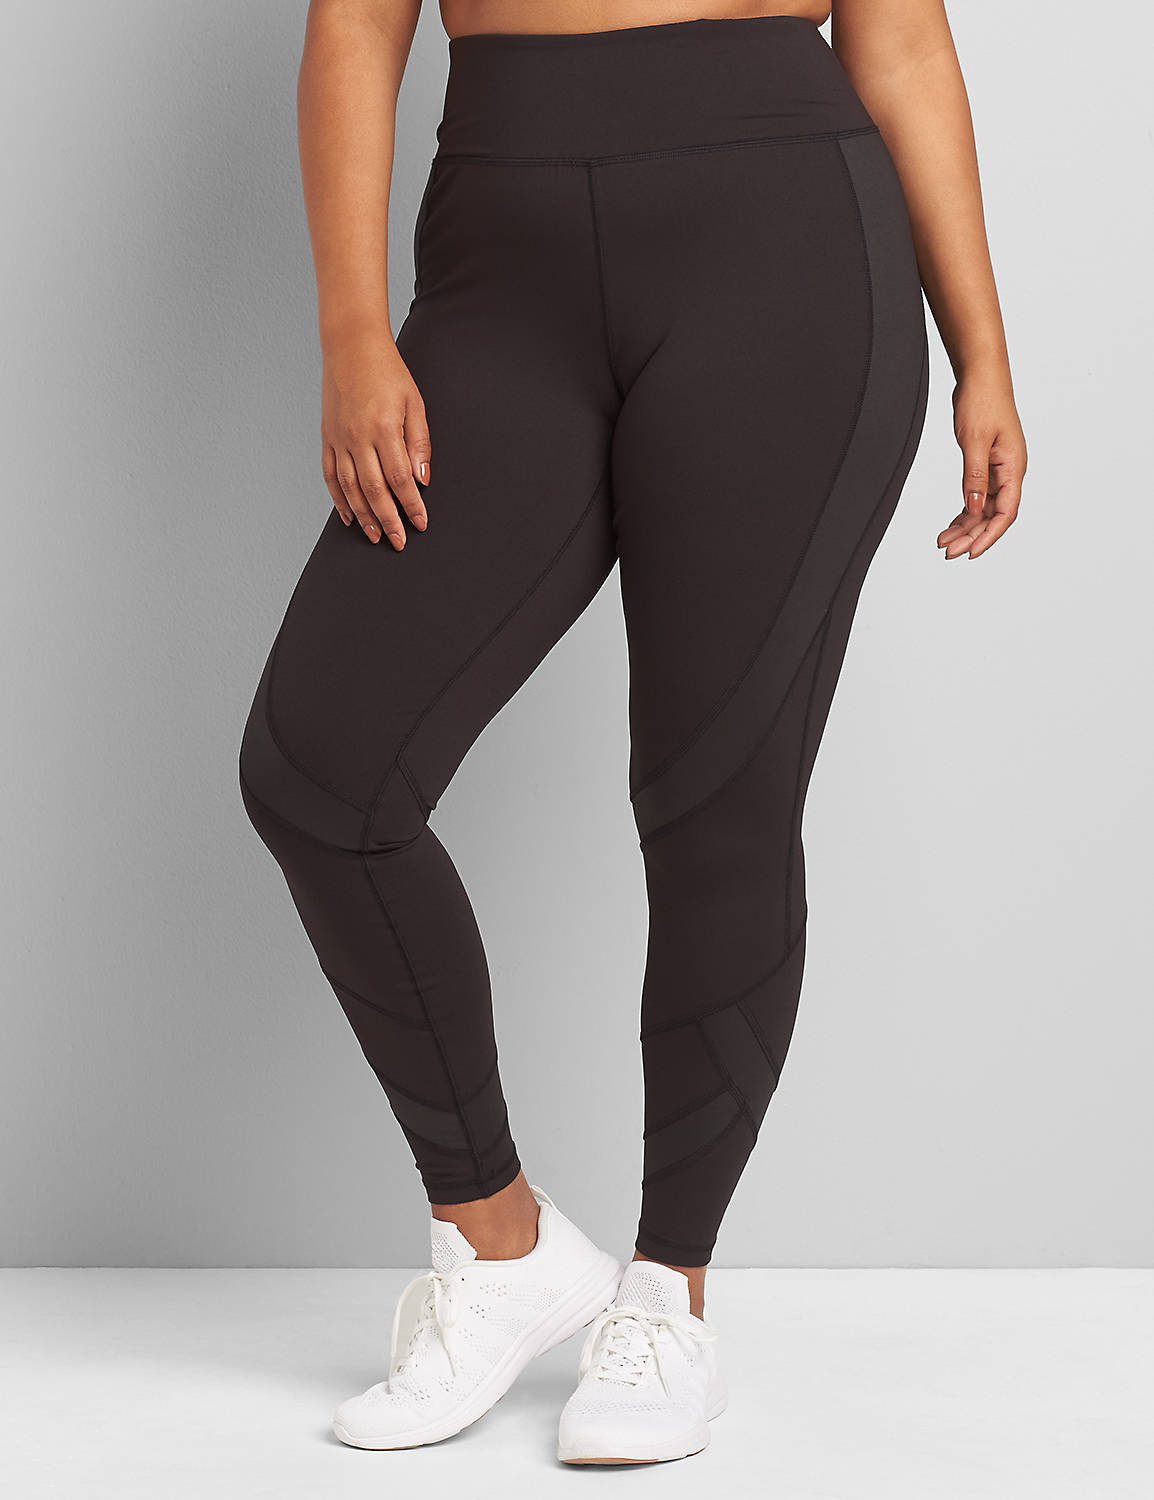 LIVI 7/8 Power Legging With Wicking - Shine Spliced Product Image 1